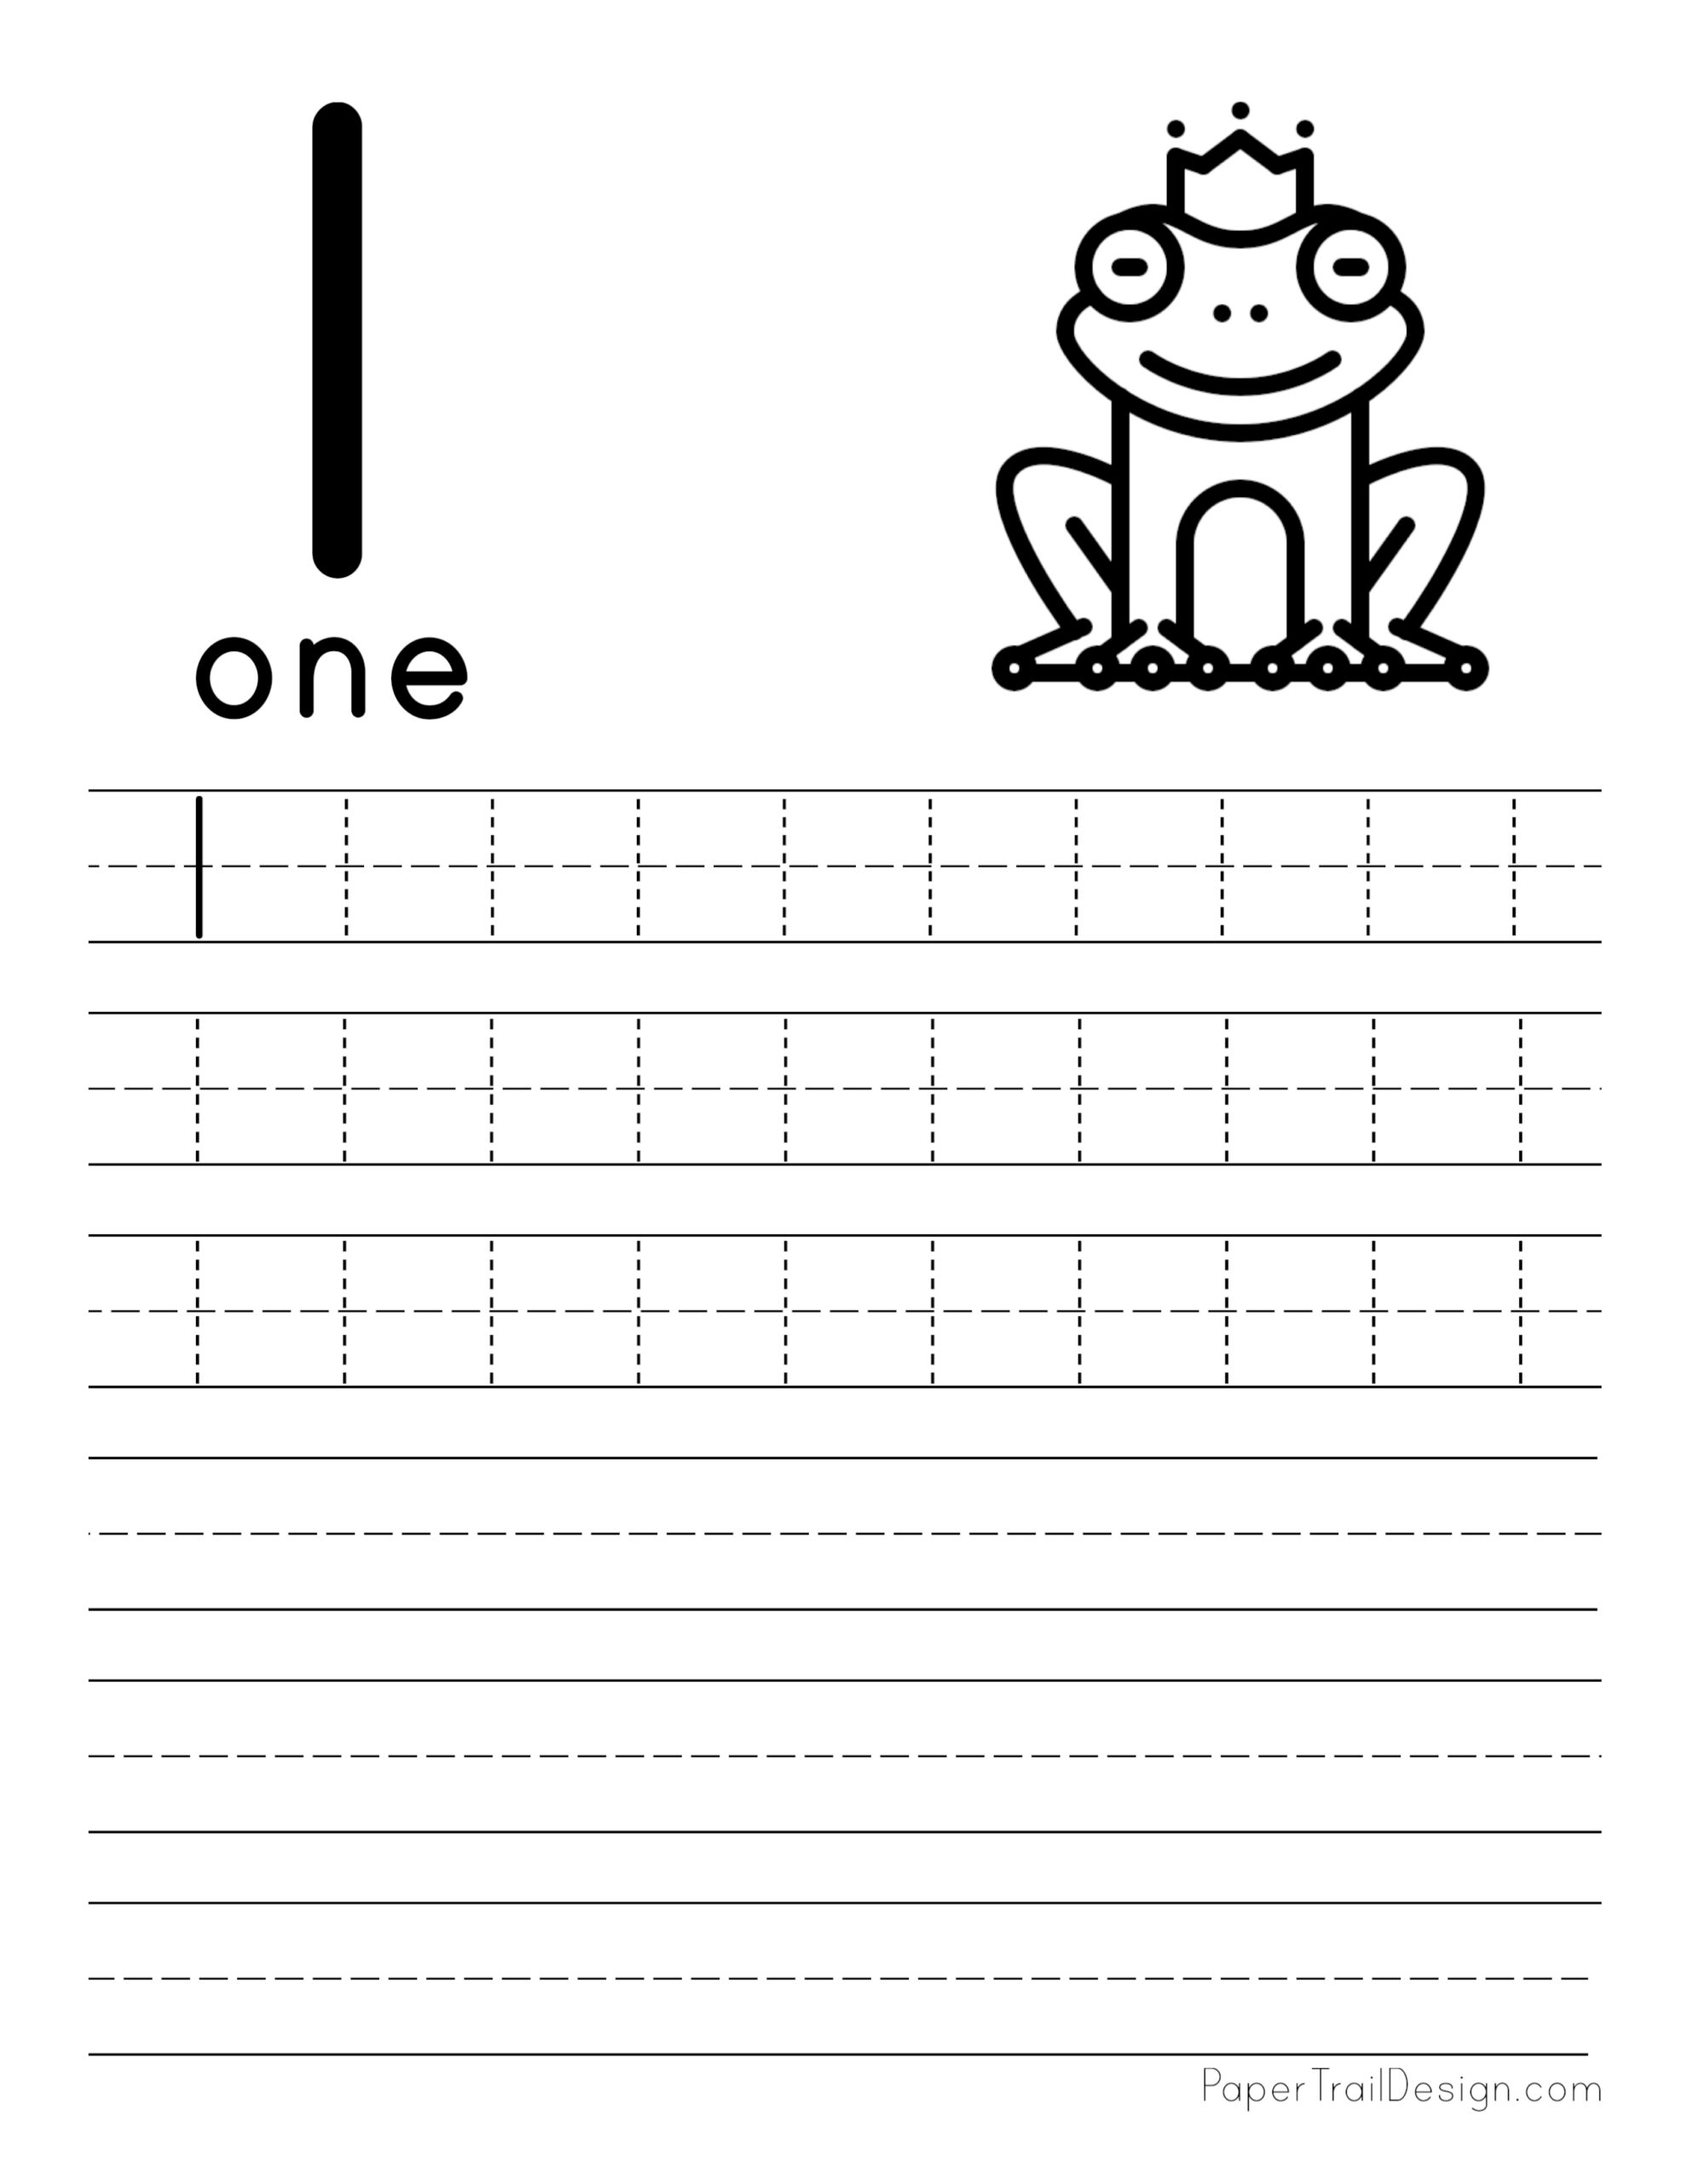 Free Printable Worksheets For Kids Tracing Numbers 1 20 Worksheets Number Tracing 1 20 Pdf